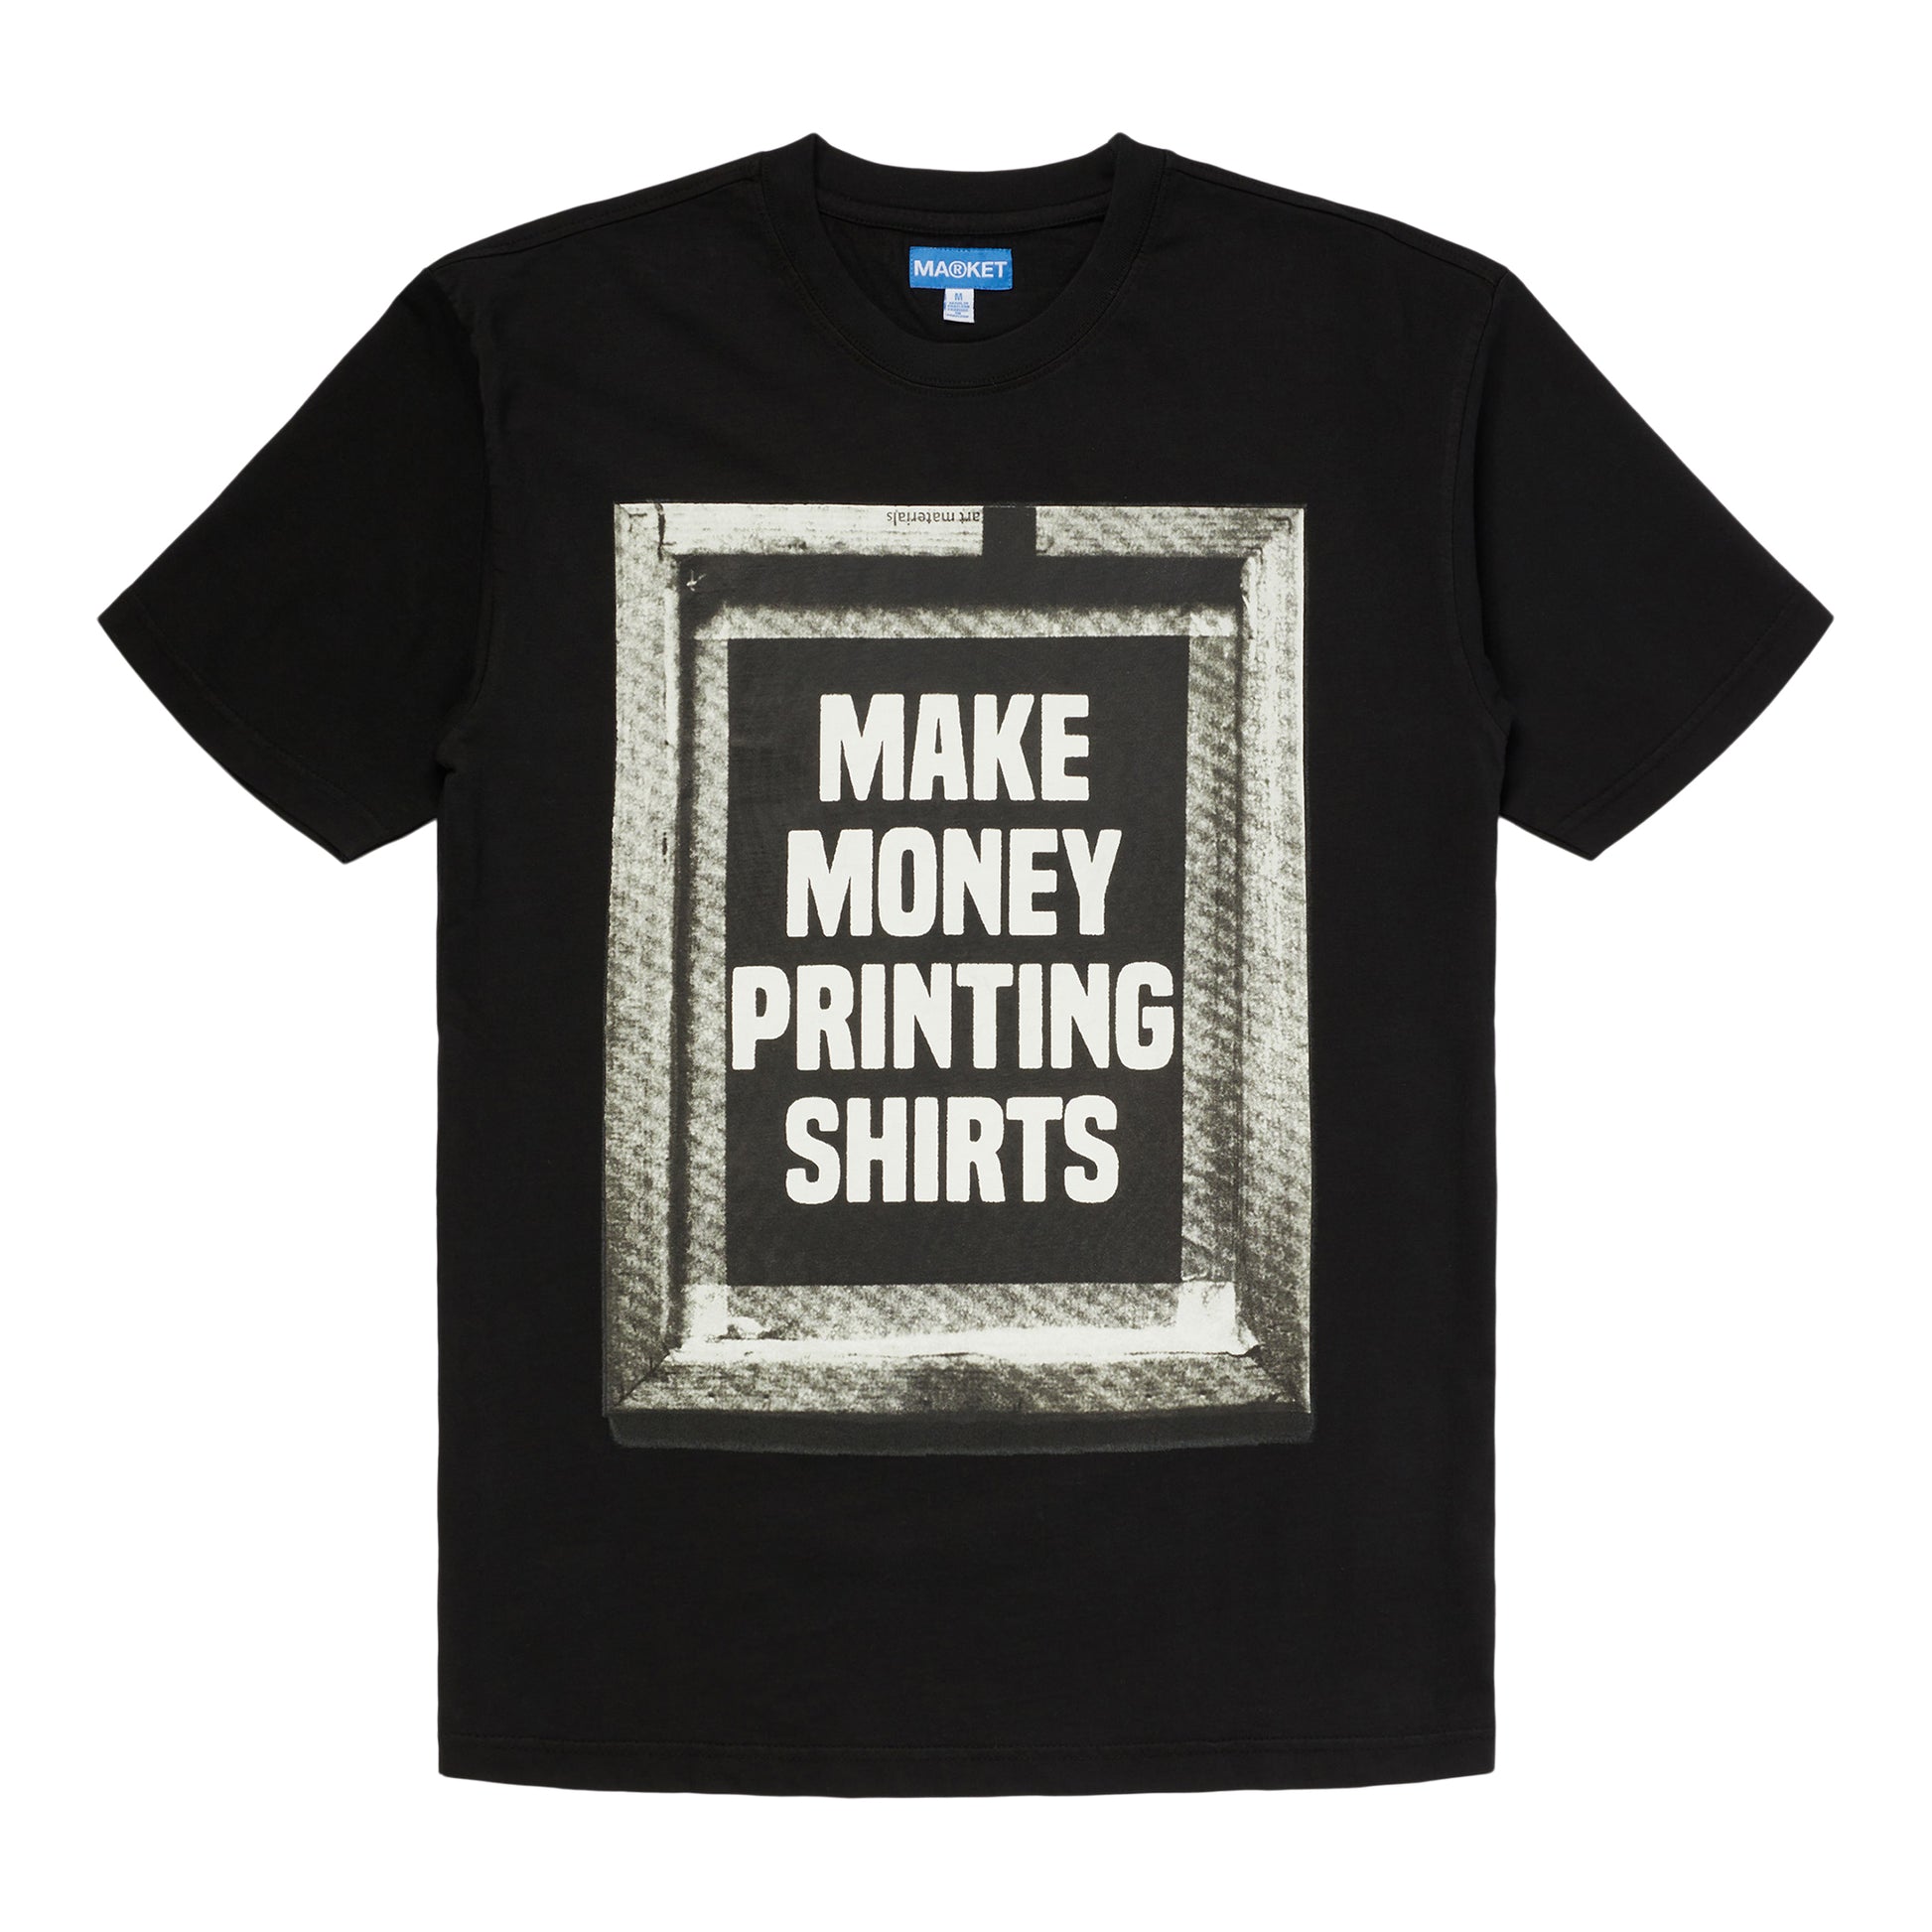 MARKET clothing brand PRINTING MONEY T-SHIRT. Find more graphic tees, hats, hoodies and more at MarketStudios.com. Formally Chinatown Market.